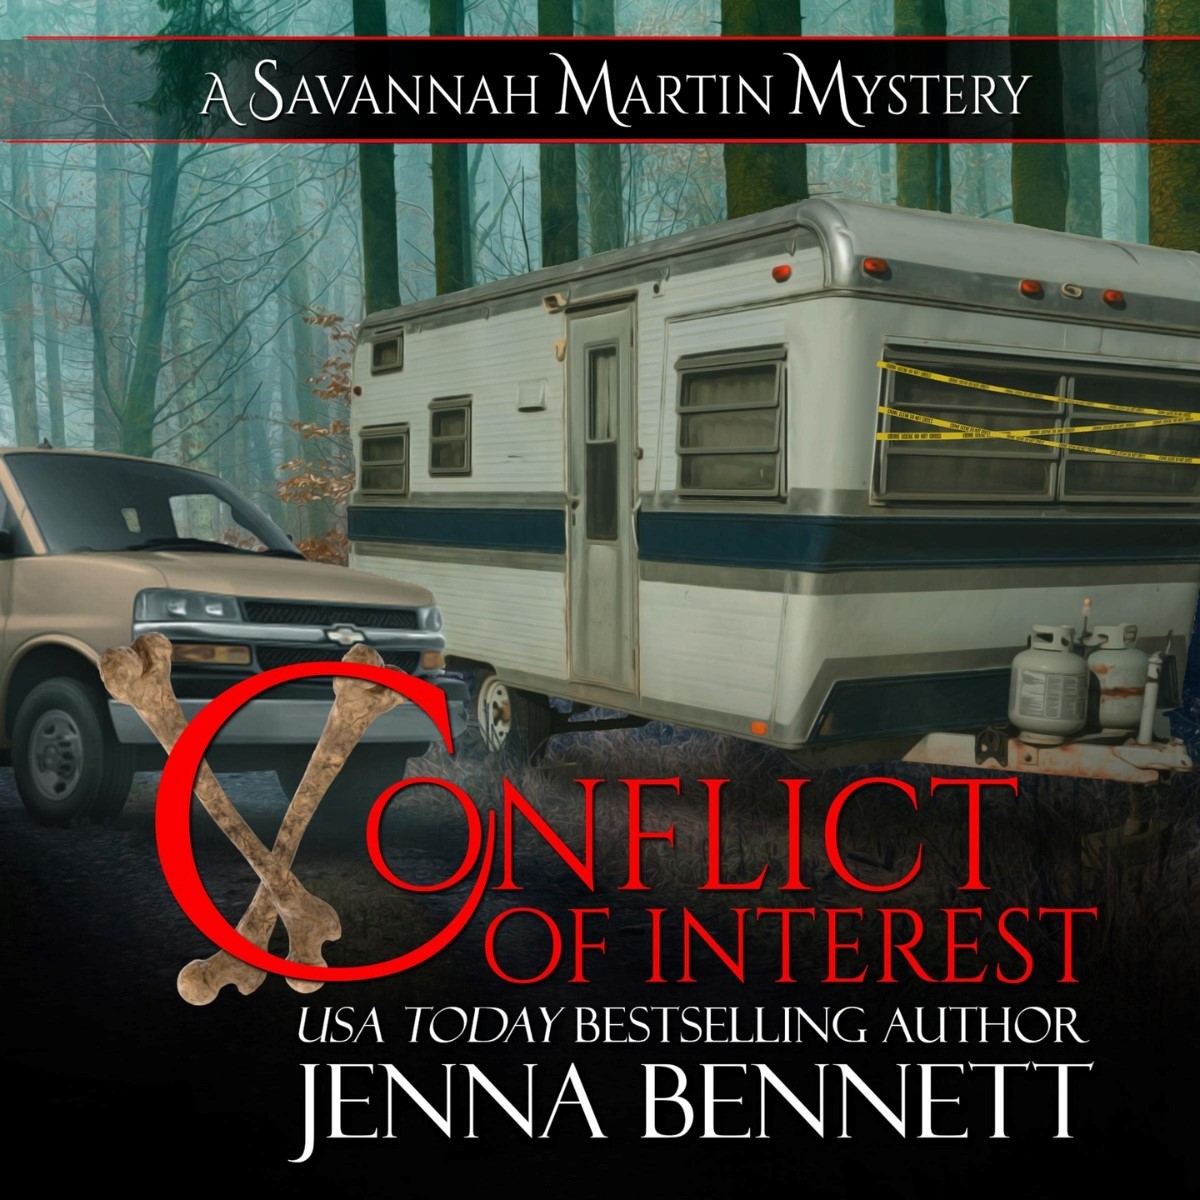 9-incredible-savannah-martin-series-by-jenna-bennett-on-kindle-for-2023